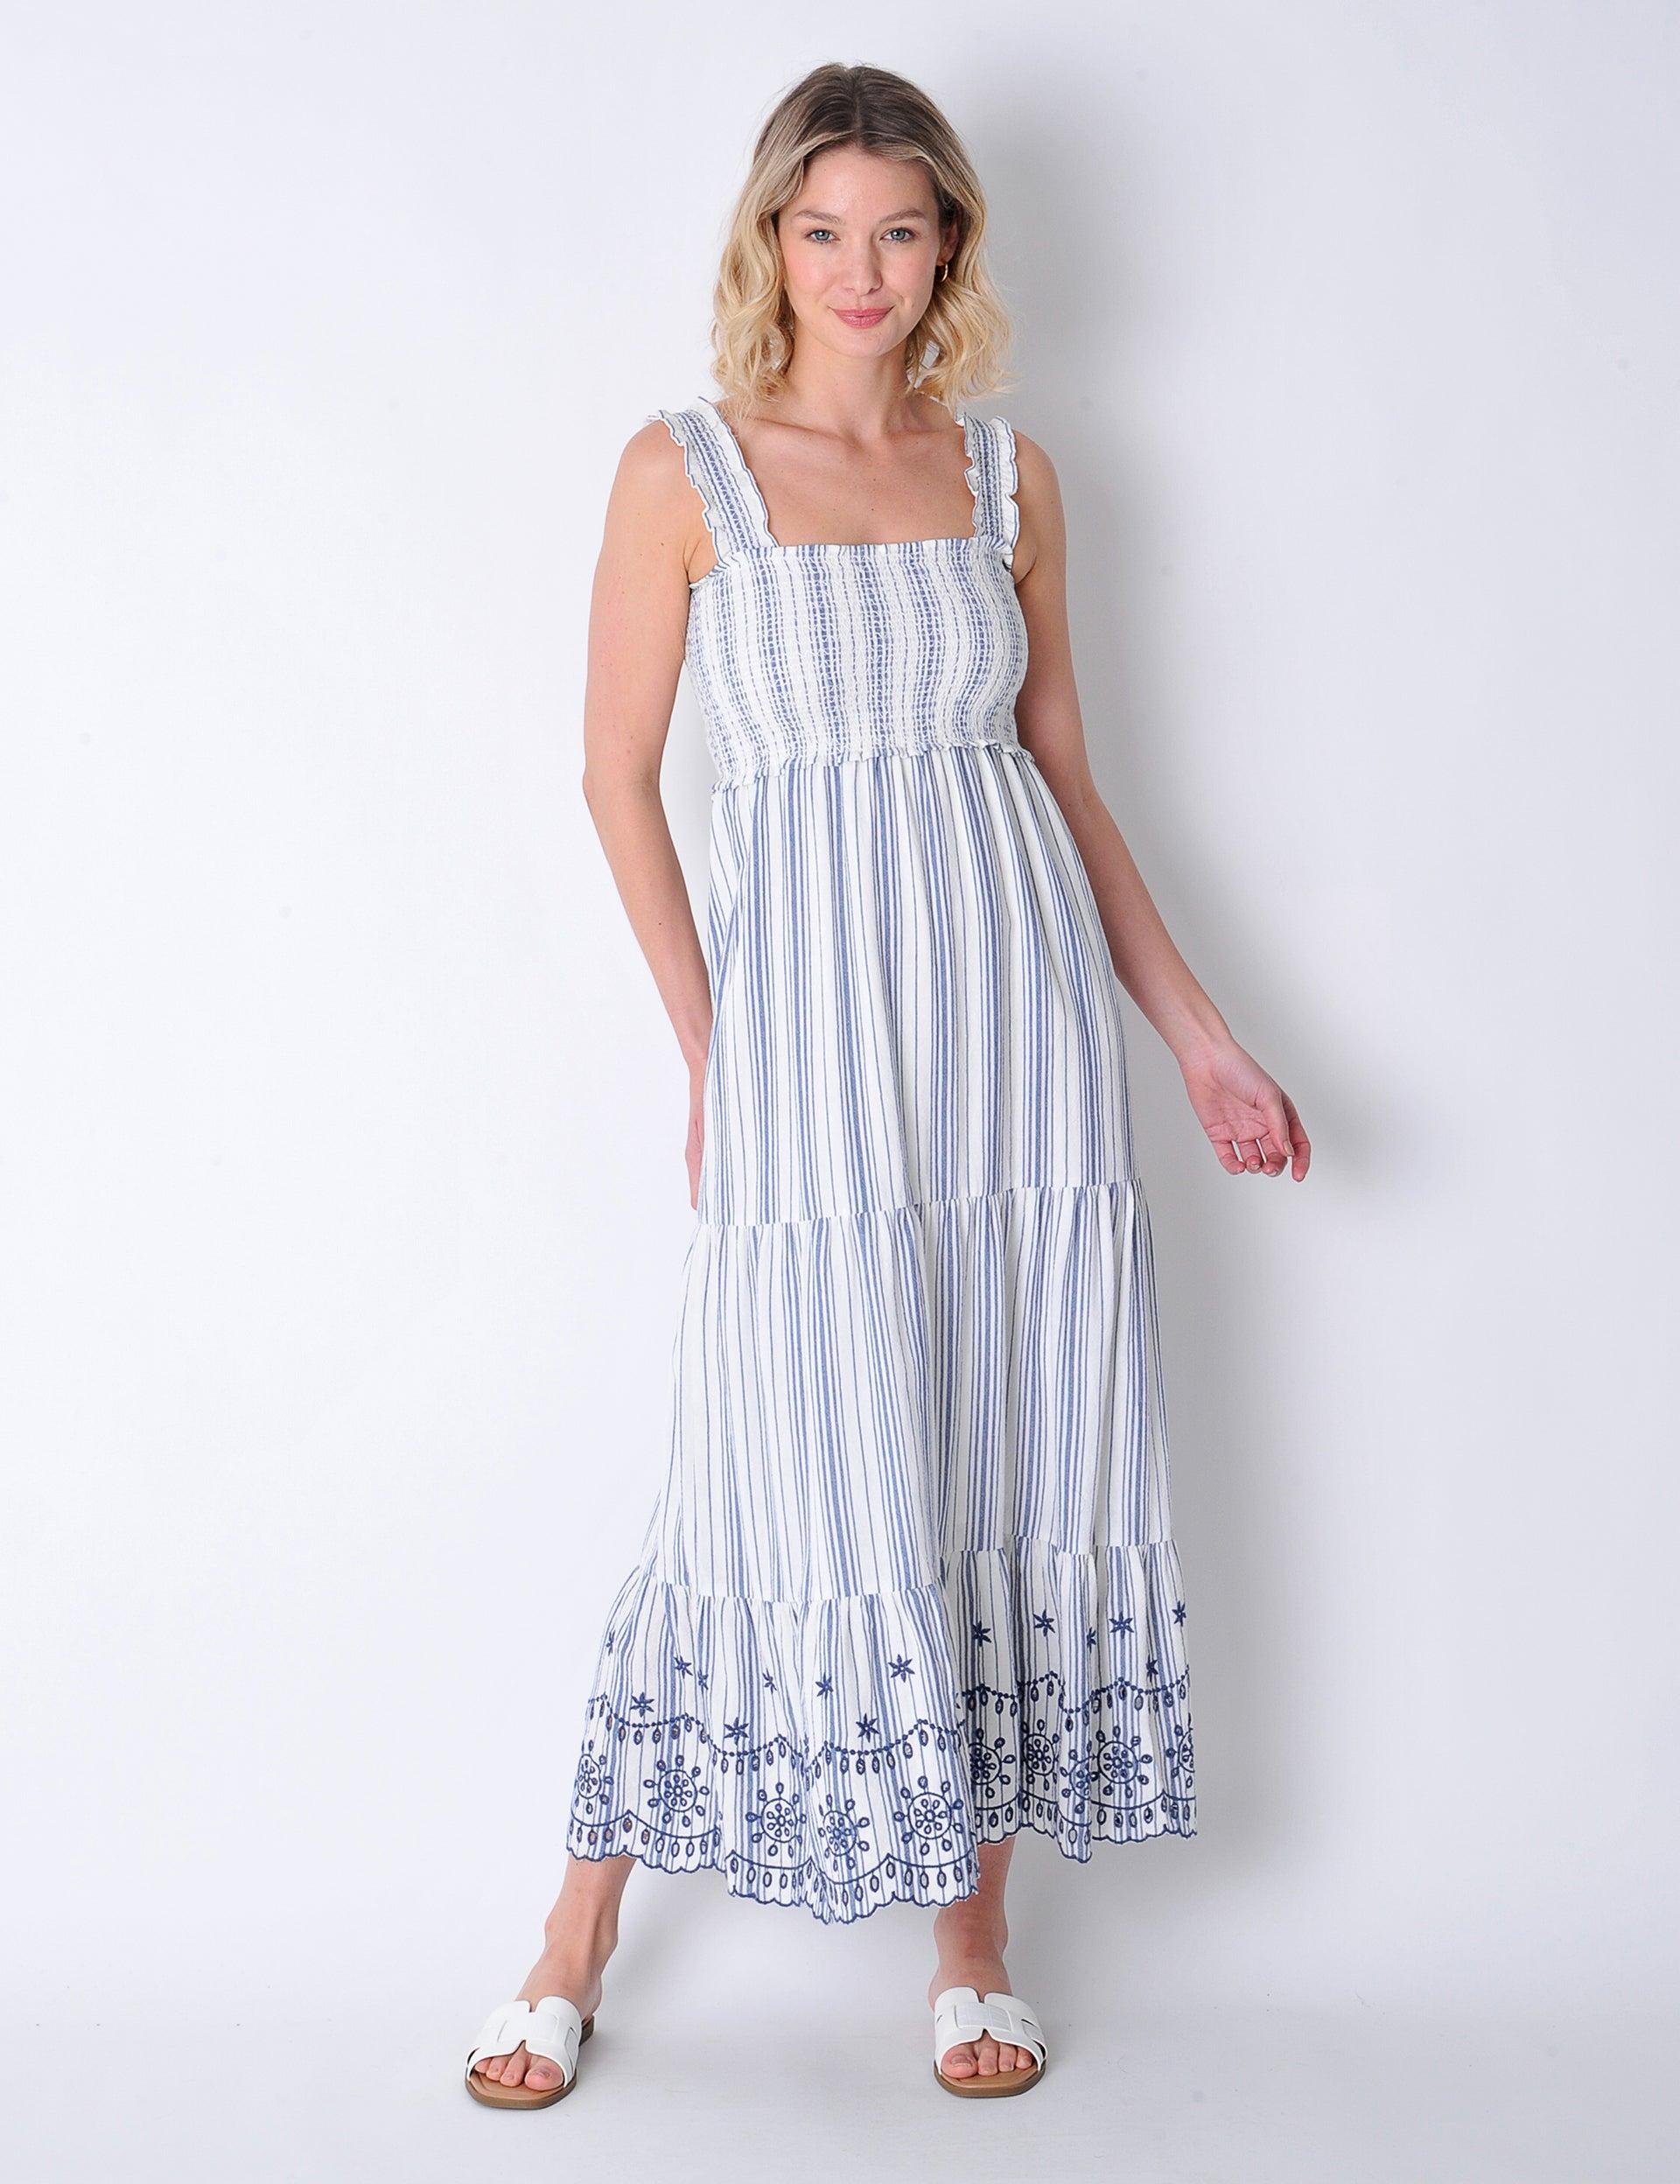 Pothilly Dress in Blue & White by BURGS